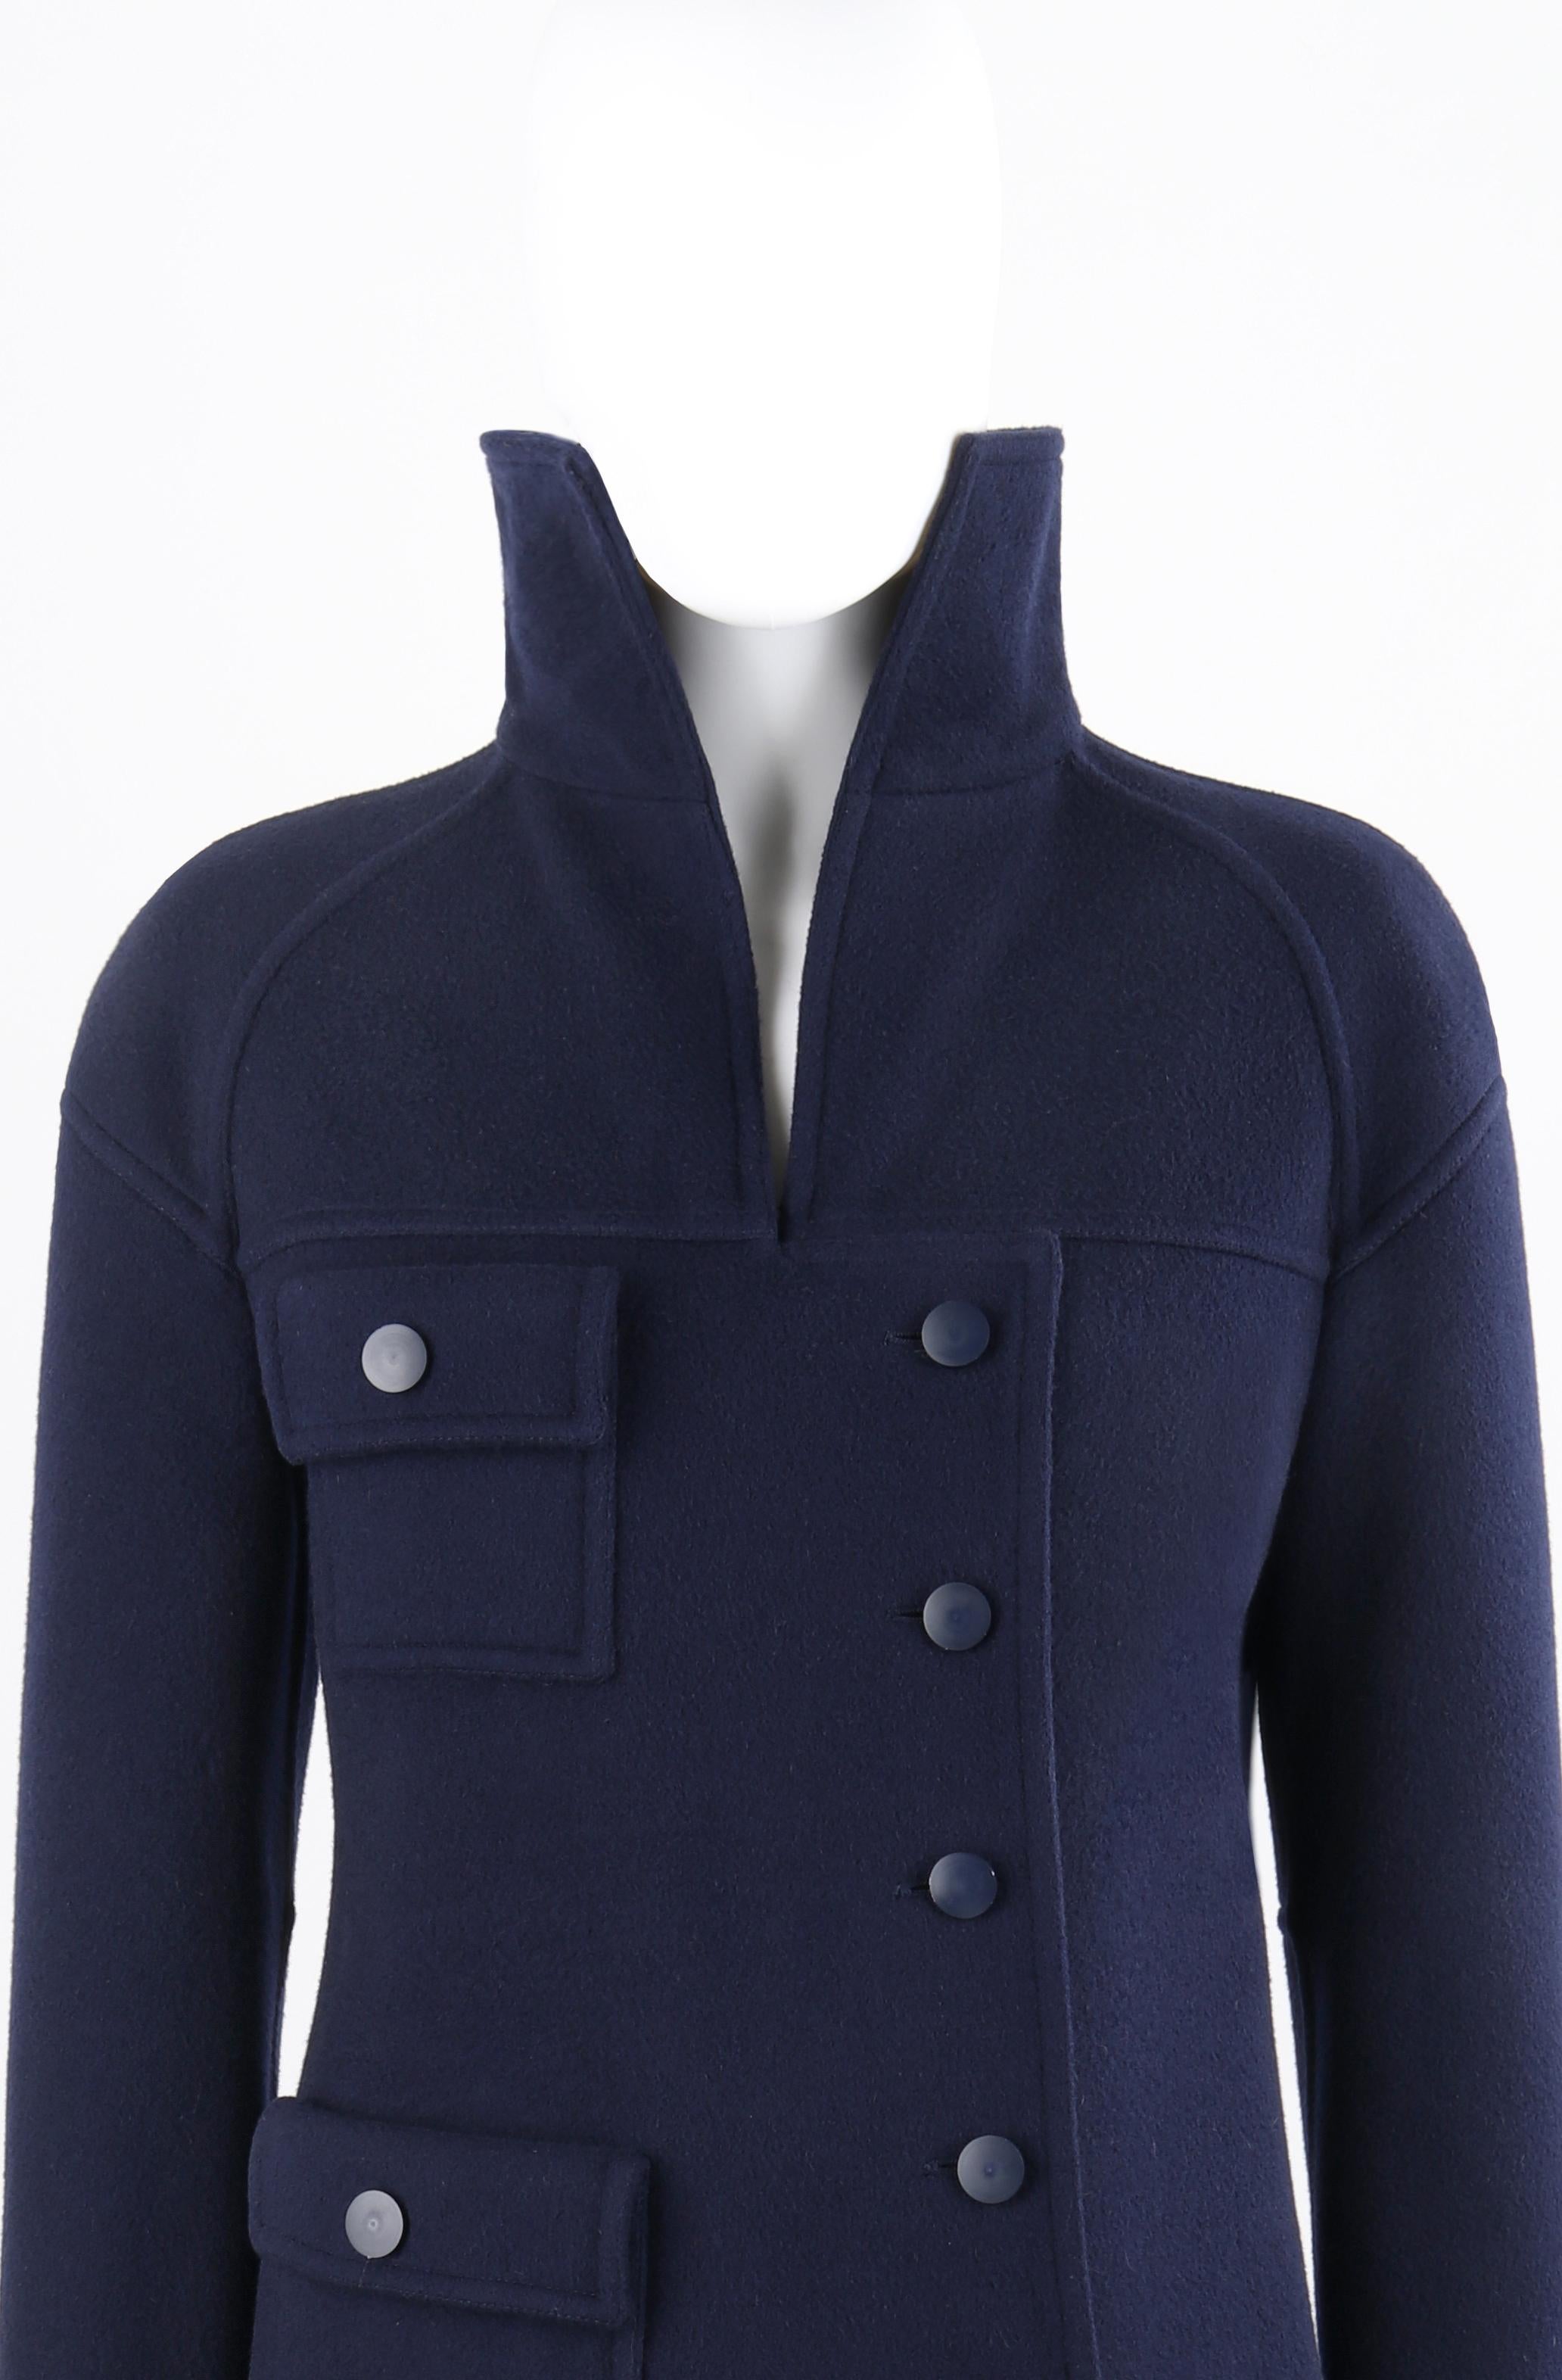 COURREGES c.1970's Couture Future Marine Navy Asymmetrical Button Front Overcoat In Good Condition For Sale In Thiensville, WI